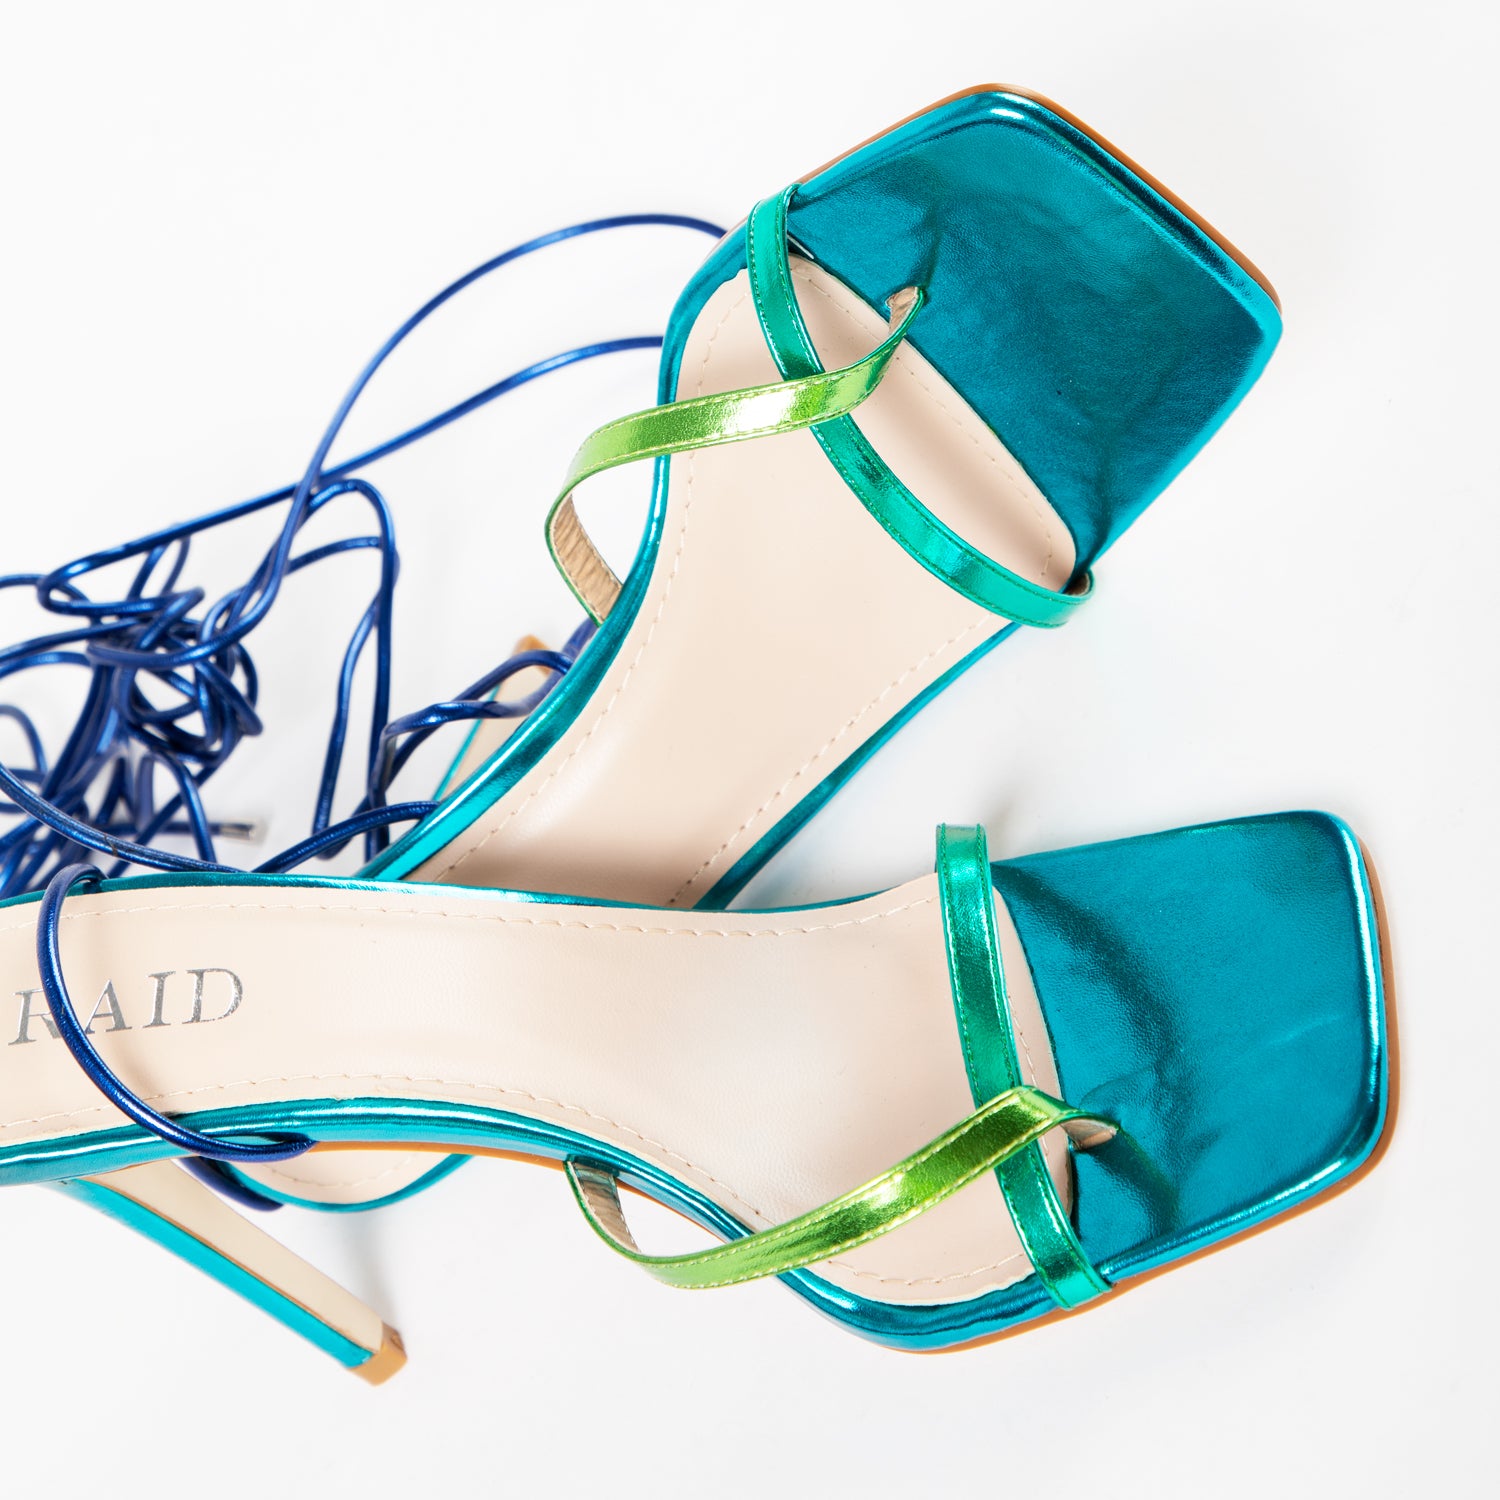 RAID Donelle Lace Up Heel in Blue Multi